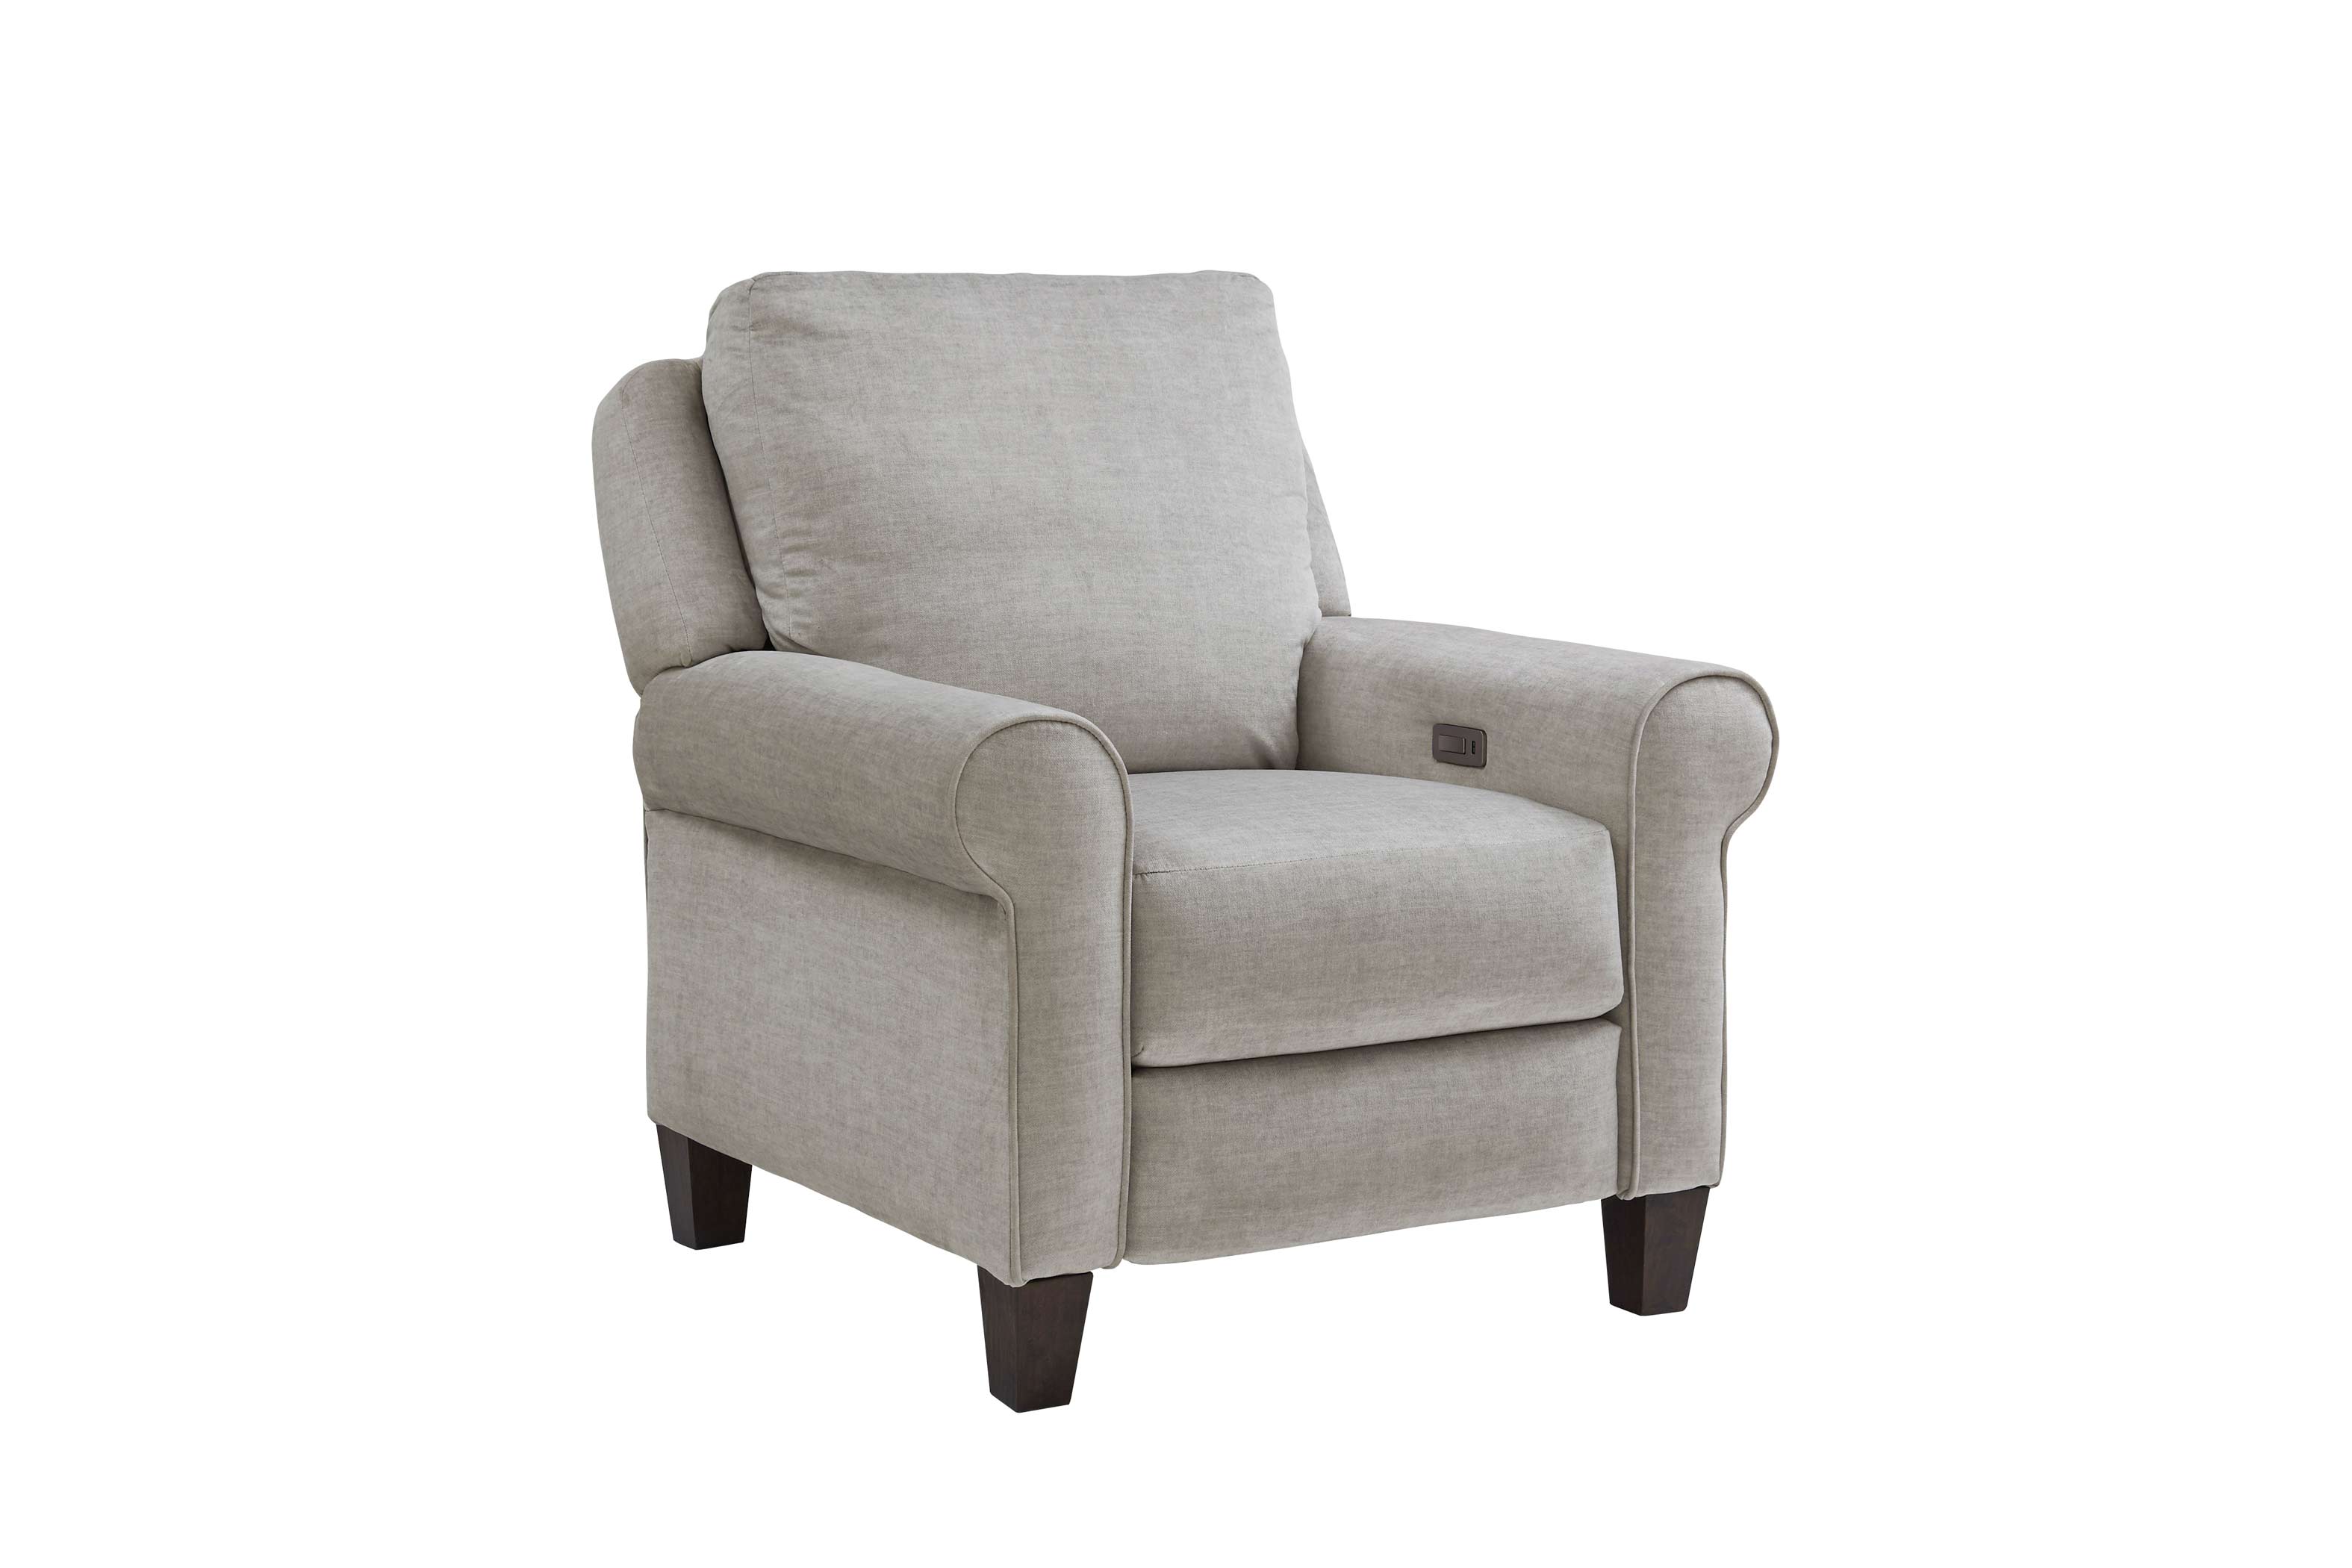 61689P Dynasty Recliner Image